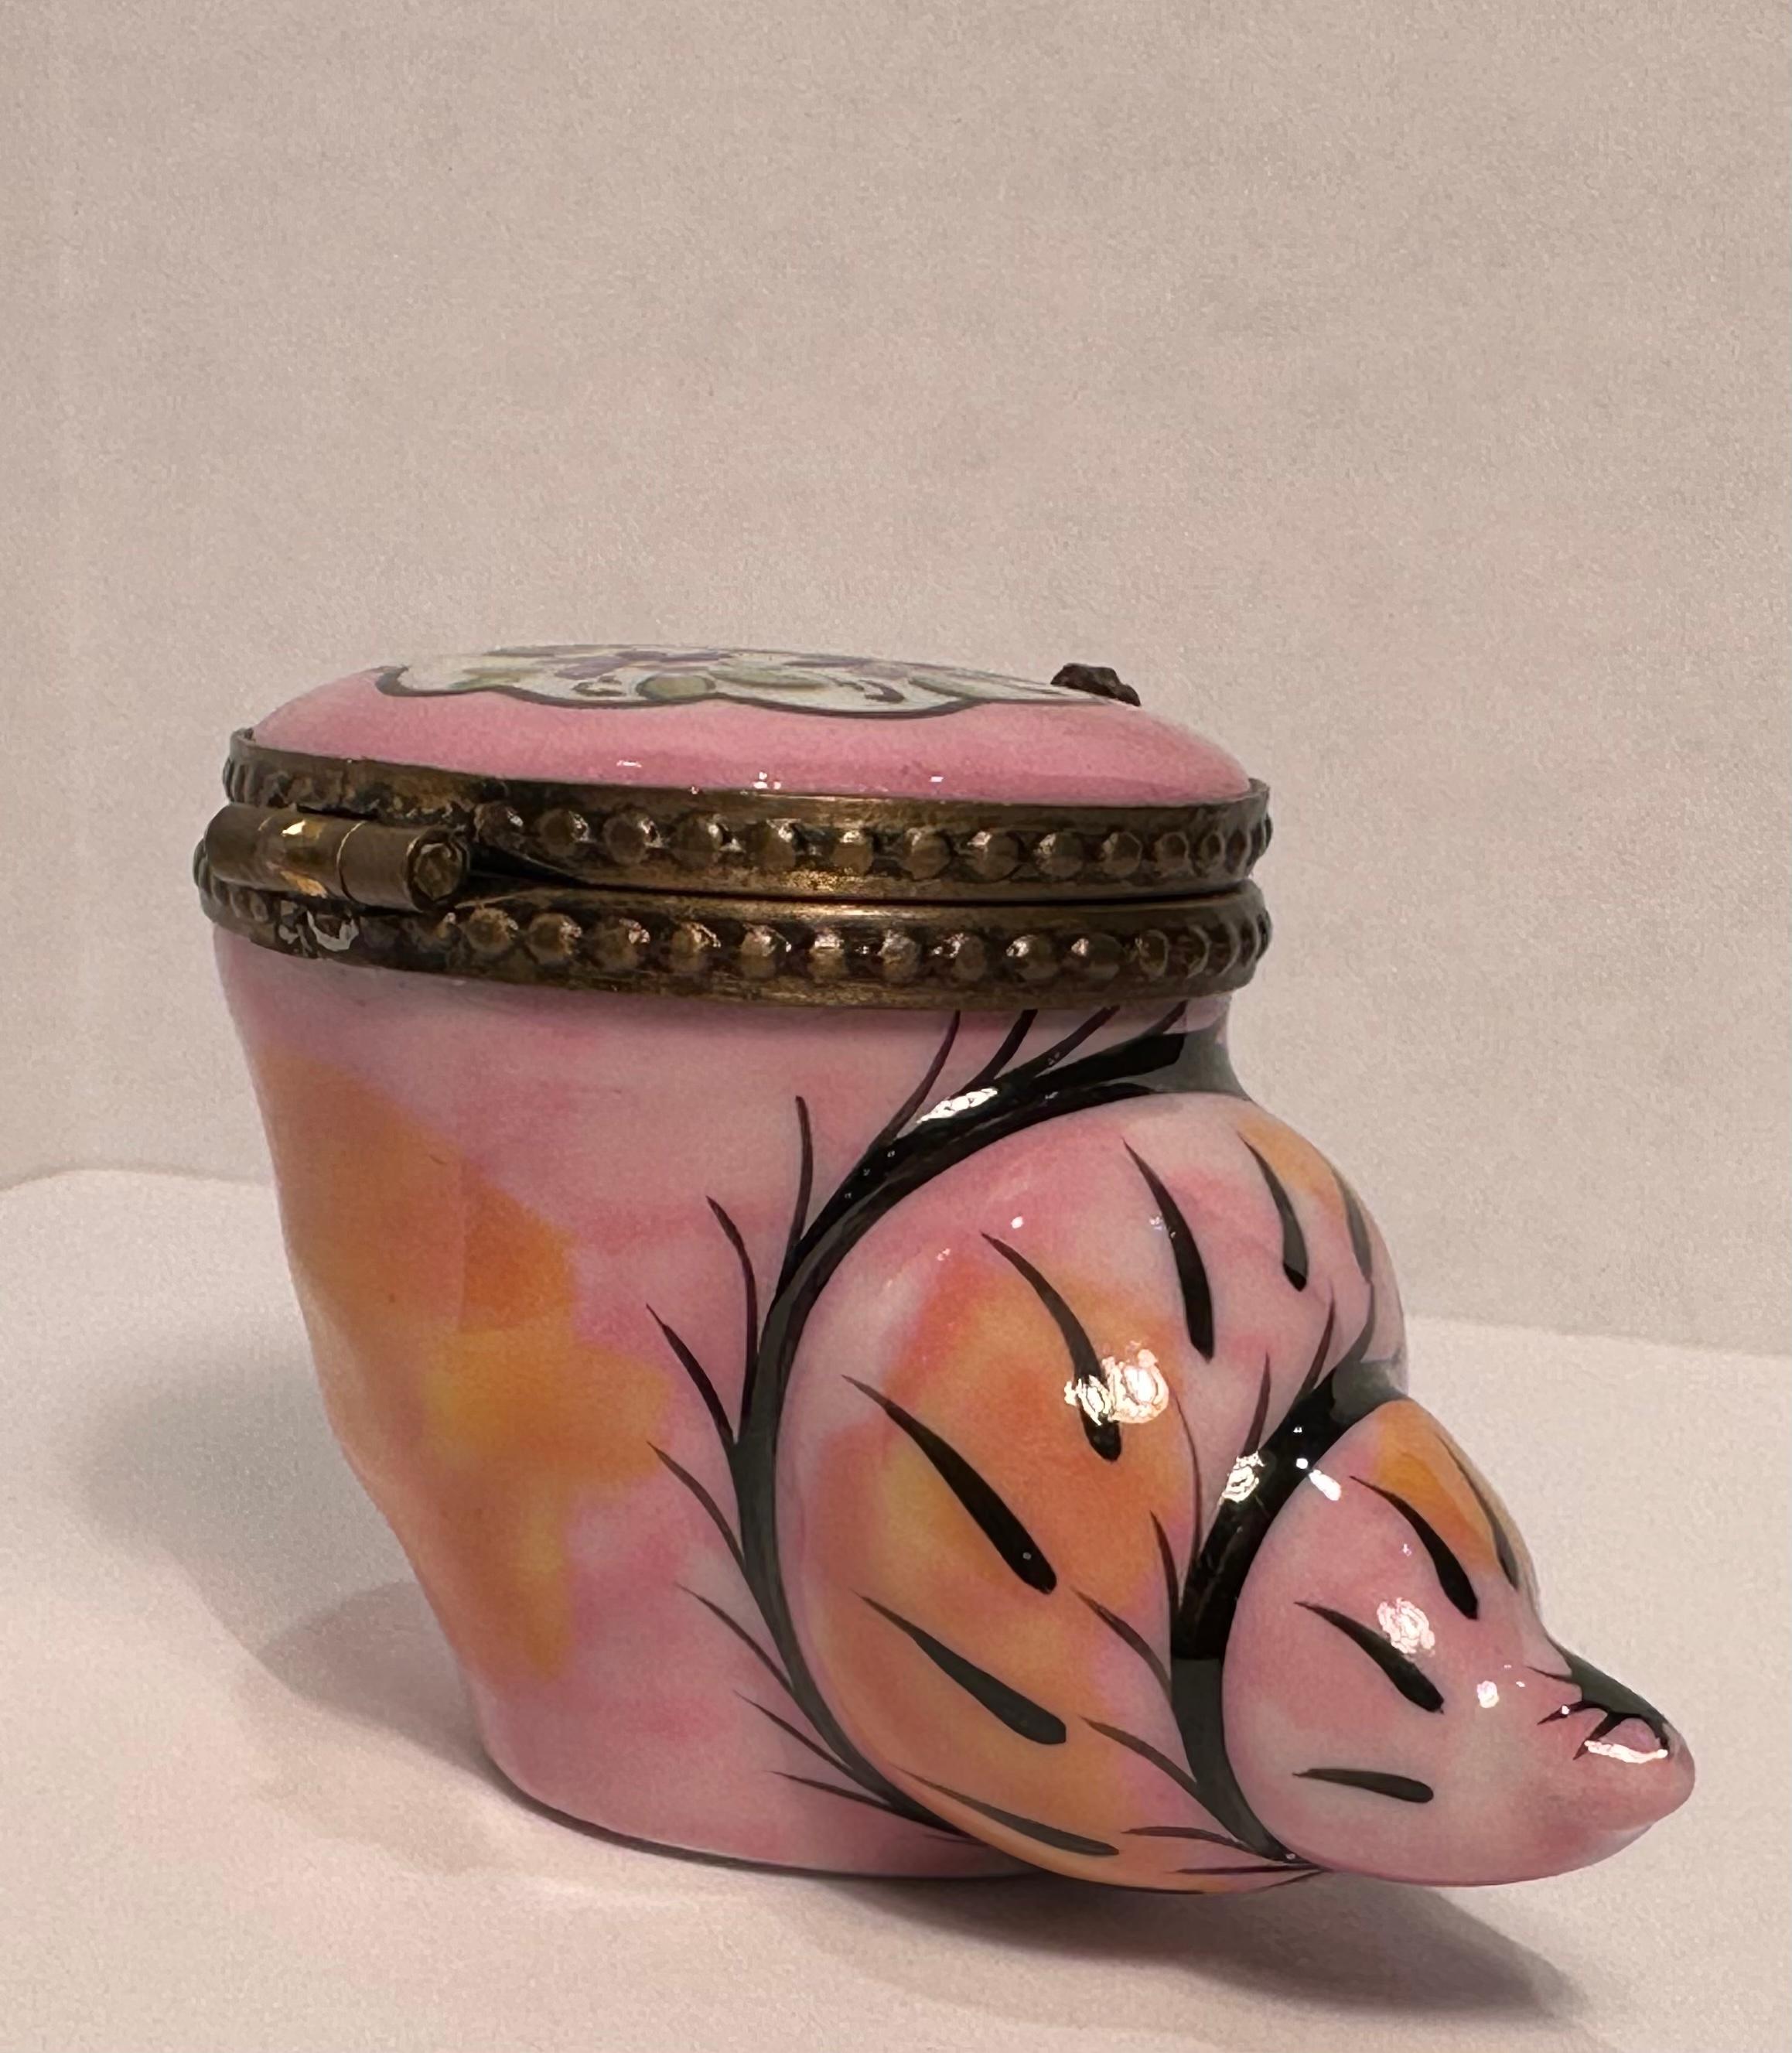 Collectible and very unique, Limoges porcelain miniature trinket box is handmade and hand painted in France. It features a beautifully hand painted pink and orange sea shell with black accents and pretty hand painted lavender and purple forget me